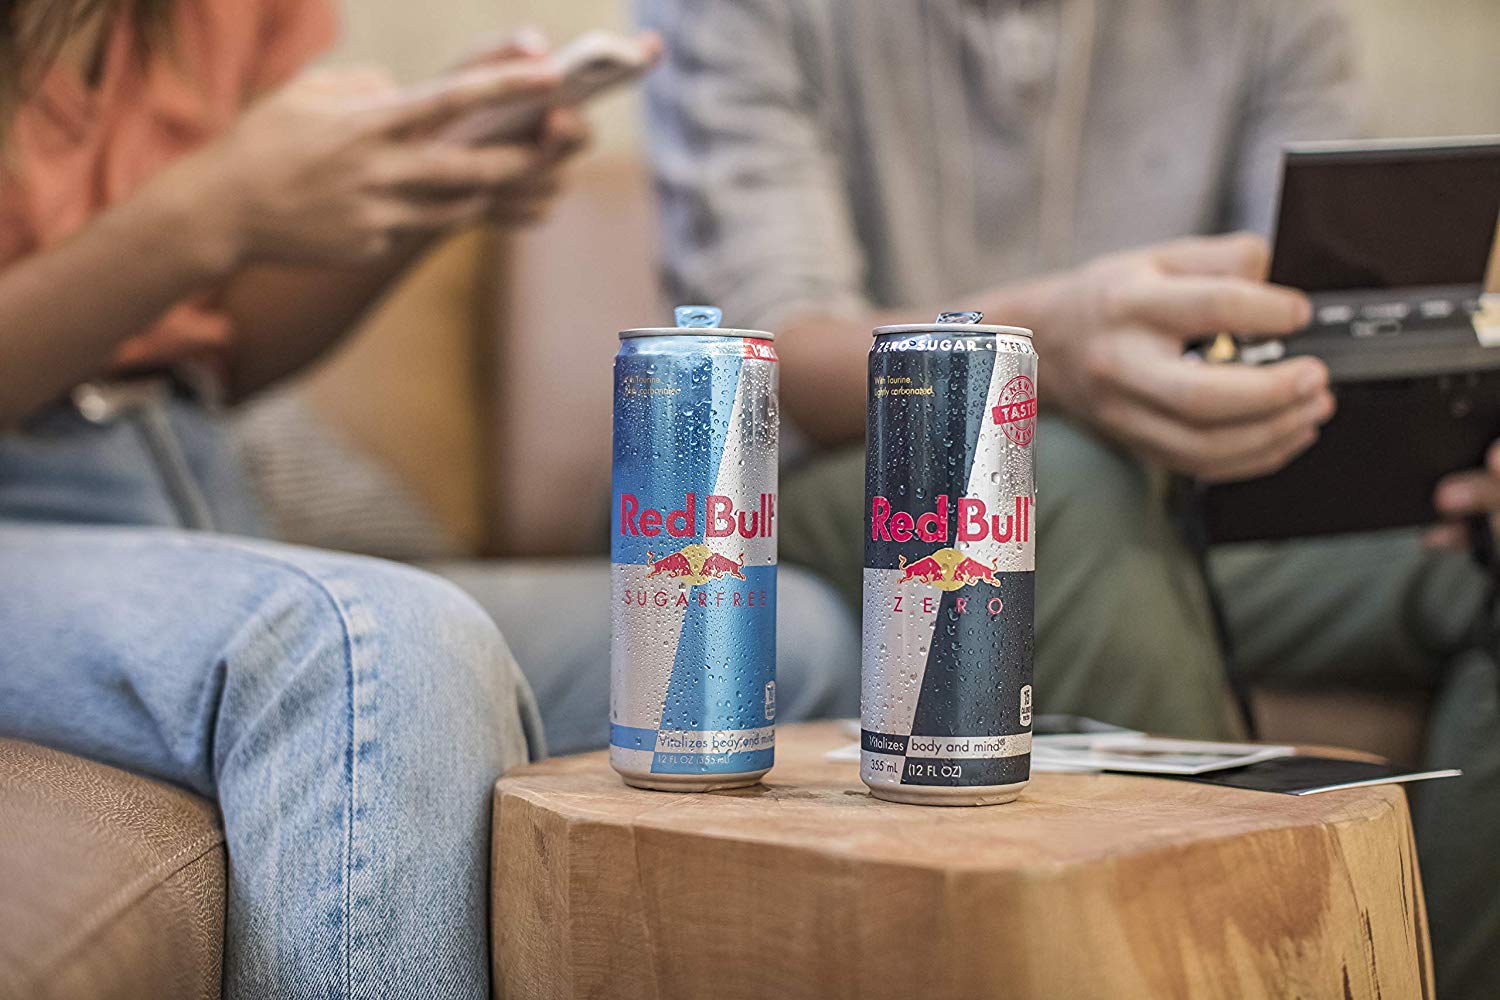 Red Just Launched A Zero-sugar Energy Drink That Tastes Like The Original